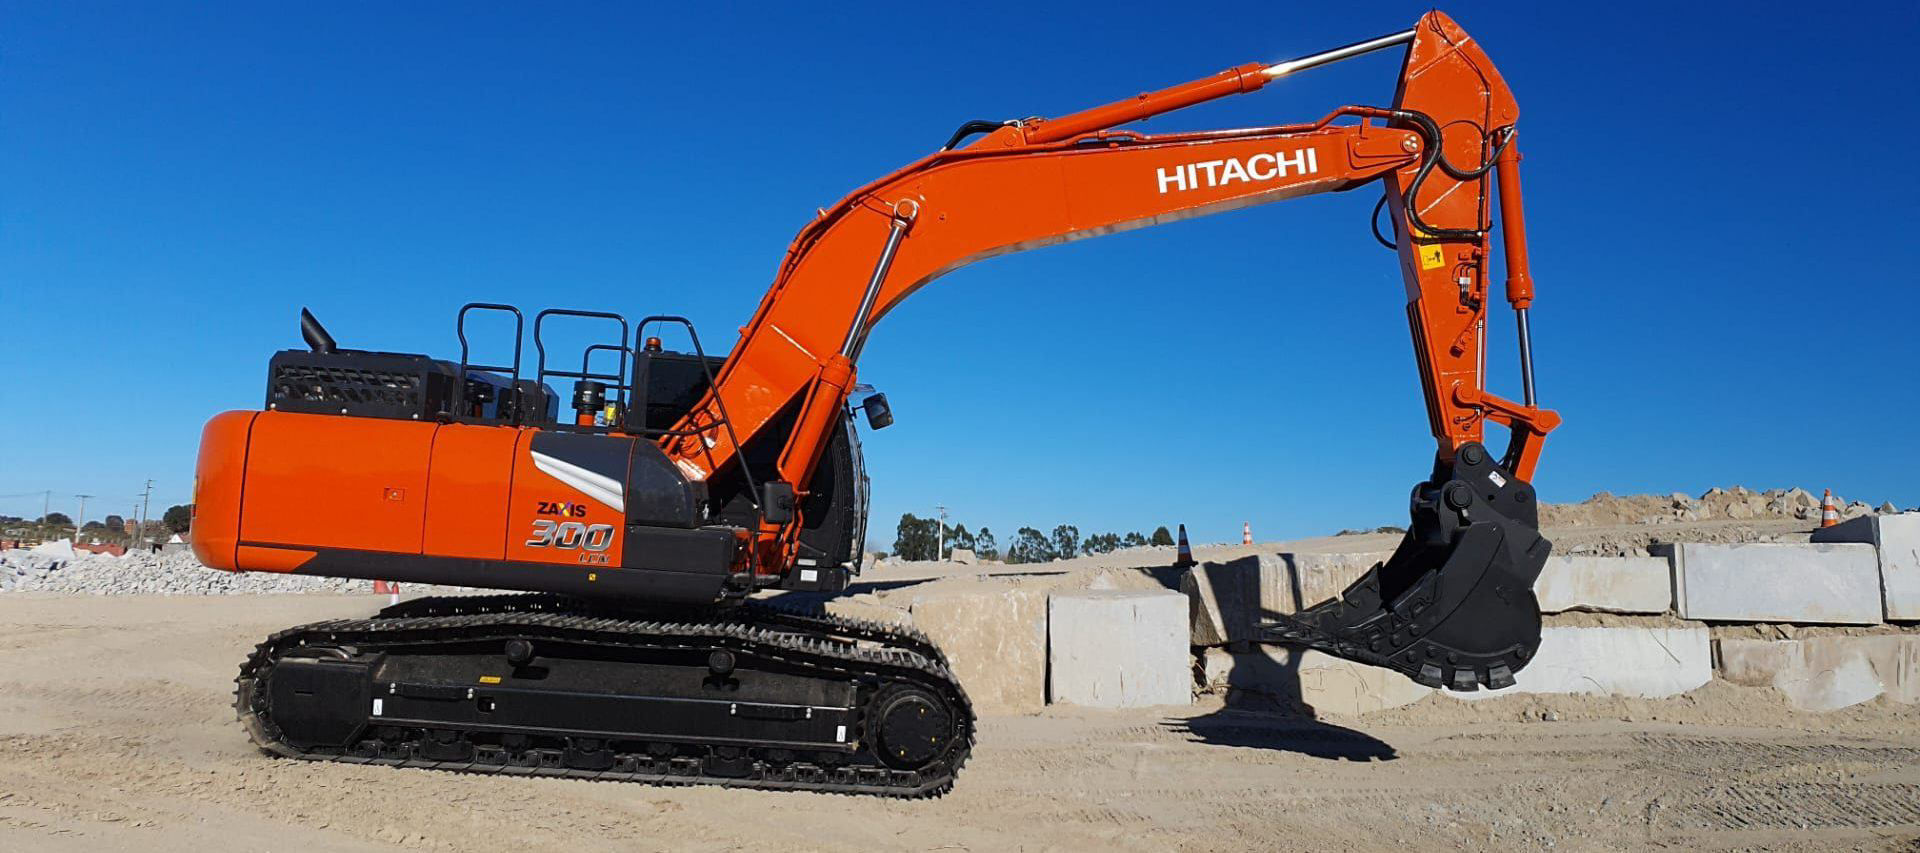 Portuguese quarry renews its trust in Hitachi with new Zaxis-7 